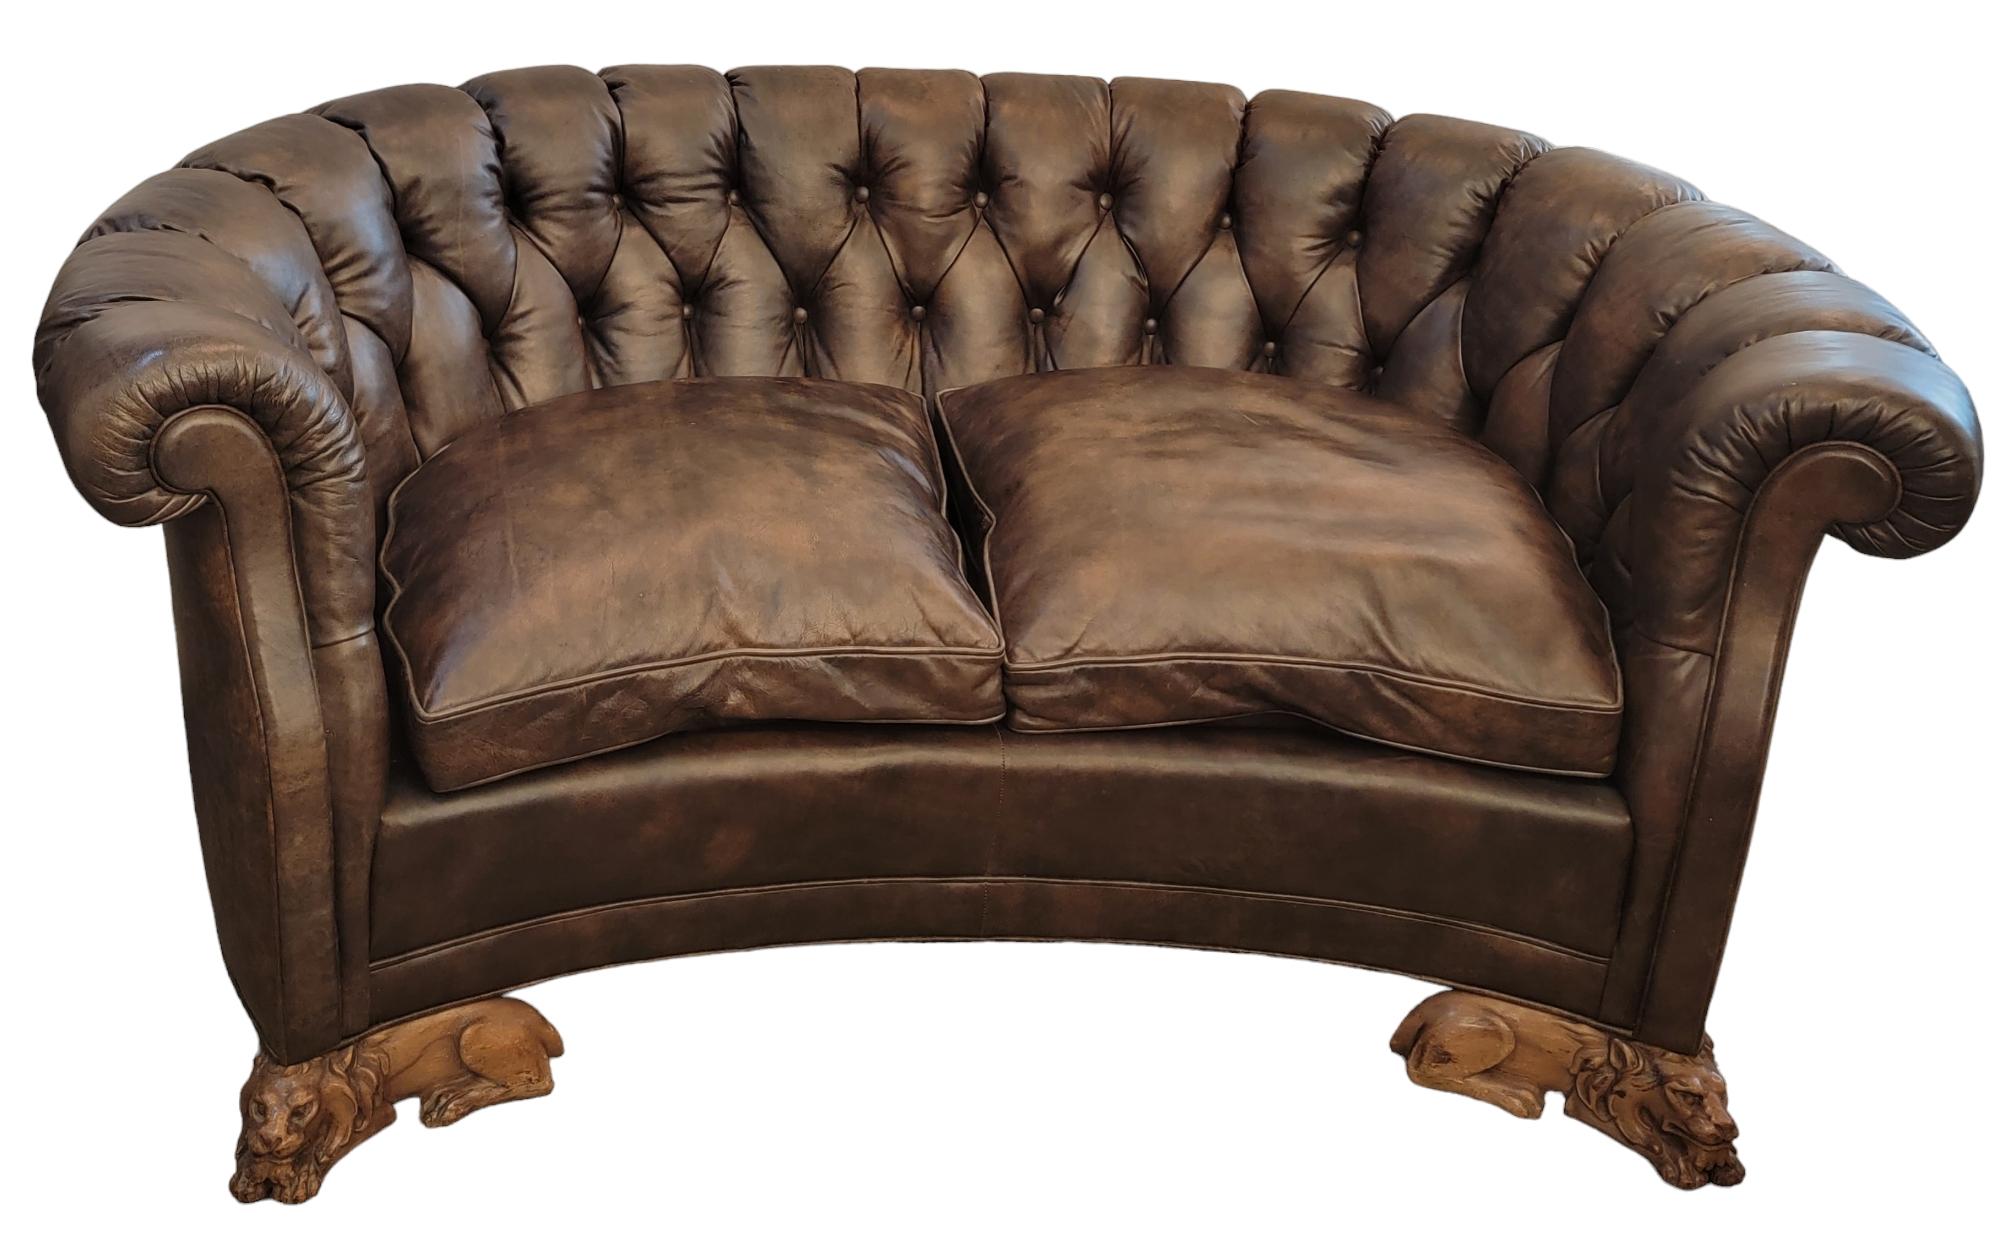 Wonderful Leather Chesterfield sofa with hand carved wooden lions legs.
English Tifted Leather Sofa With Wooden Lion Feet. The leather a beautiful varigated brown throughout the entire sofa. The back legs are solid and slightly curved. Cushioned